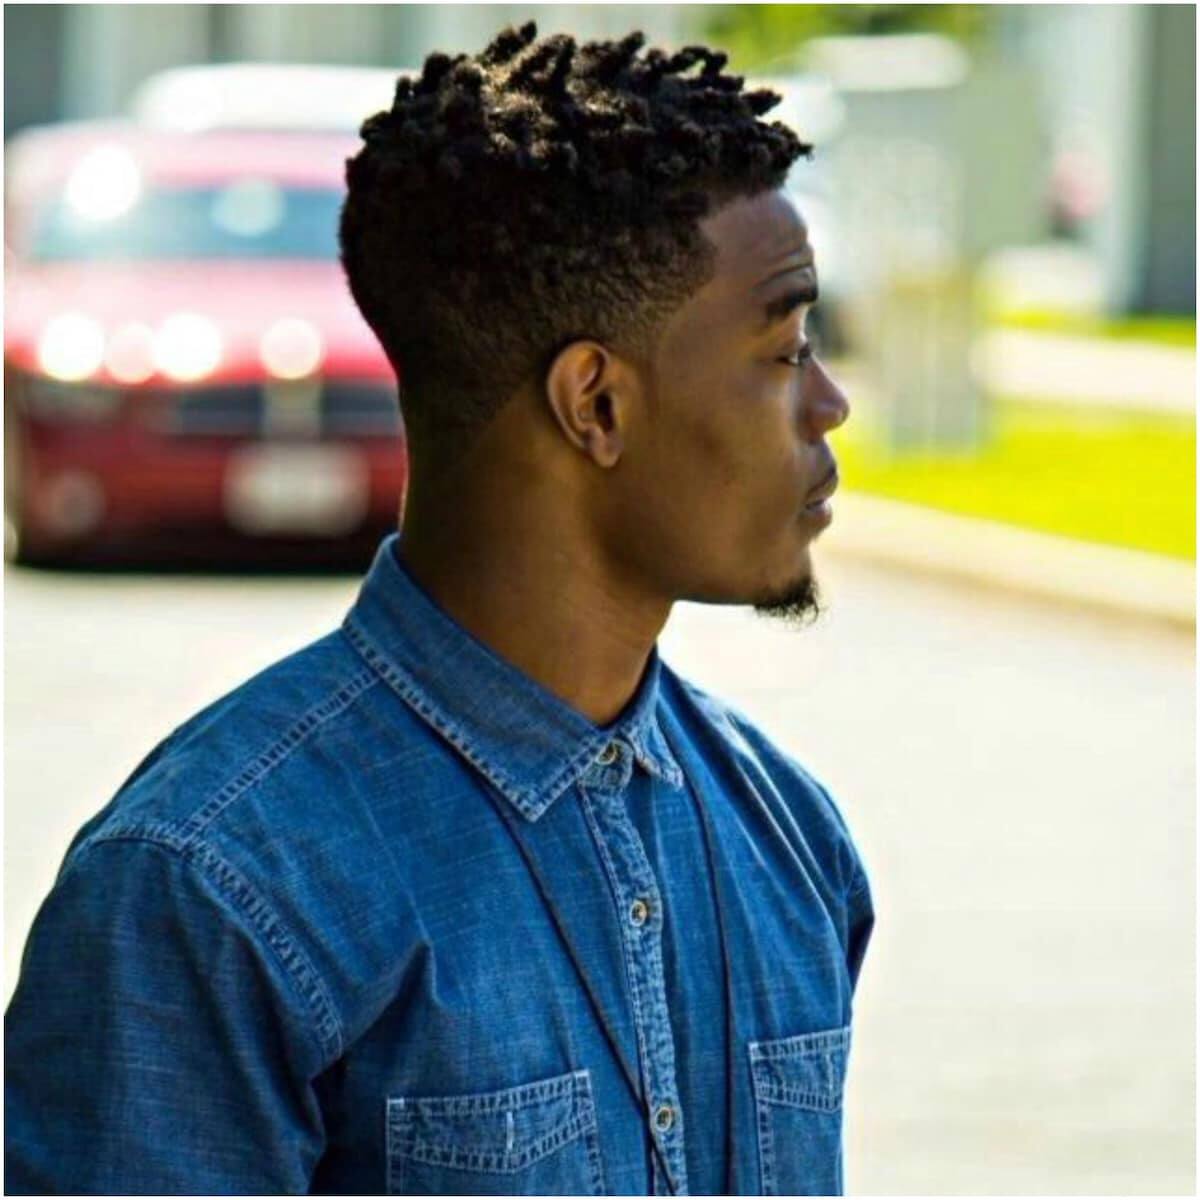 50 Stylish Haircuts For Black Men in 2023 Black men haircuts, Black haircut  styles, Haircuts for men, haircut styles - thirstymag.com